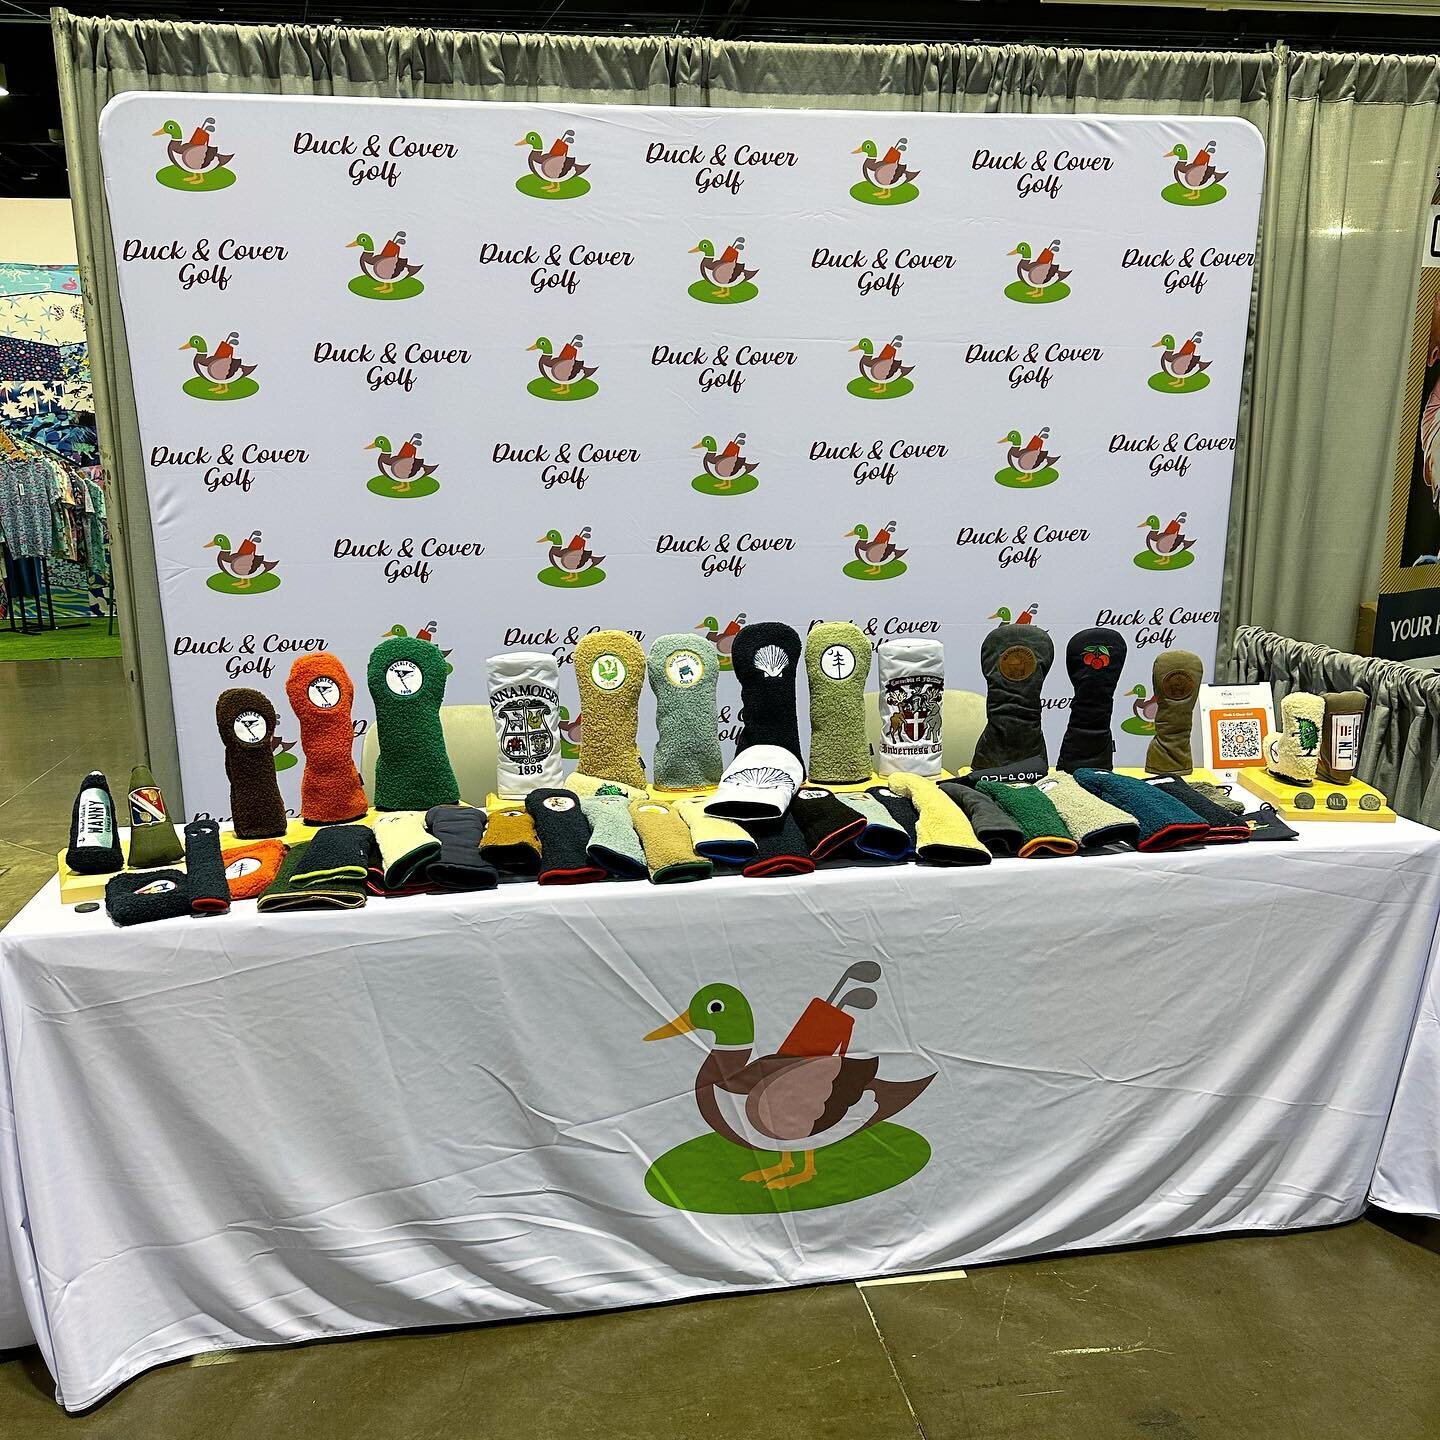 Excited to be back at the @pgagolfshows this week. Stop by booth 5383 to check out all our new headcovers. #pgashow #pgashow2024 #sherpaheadcover